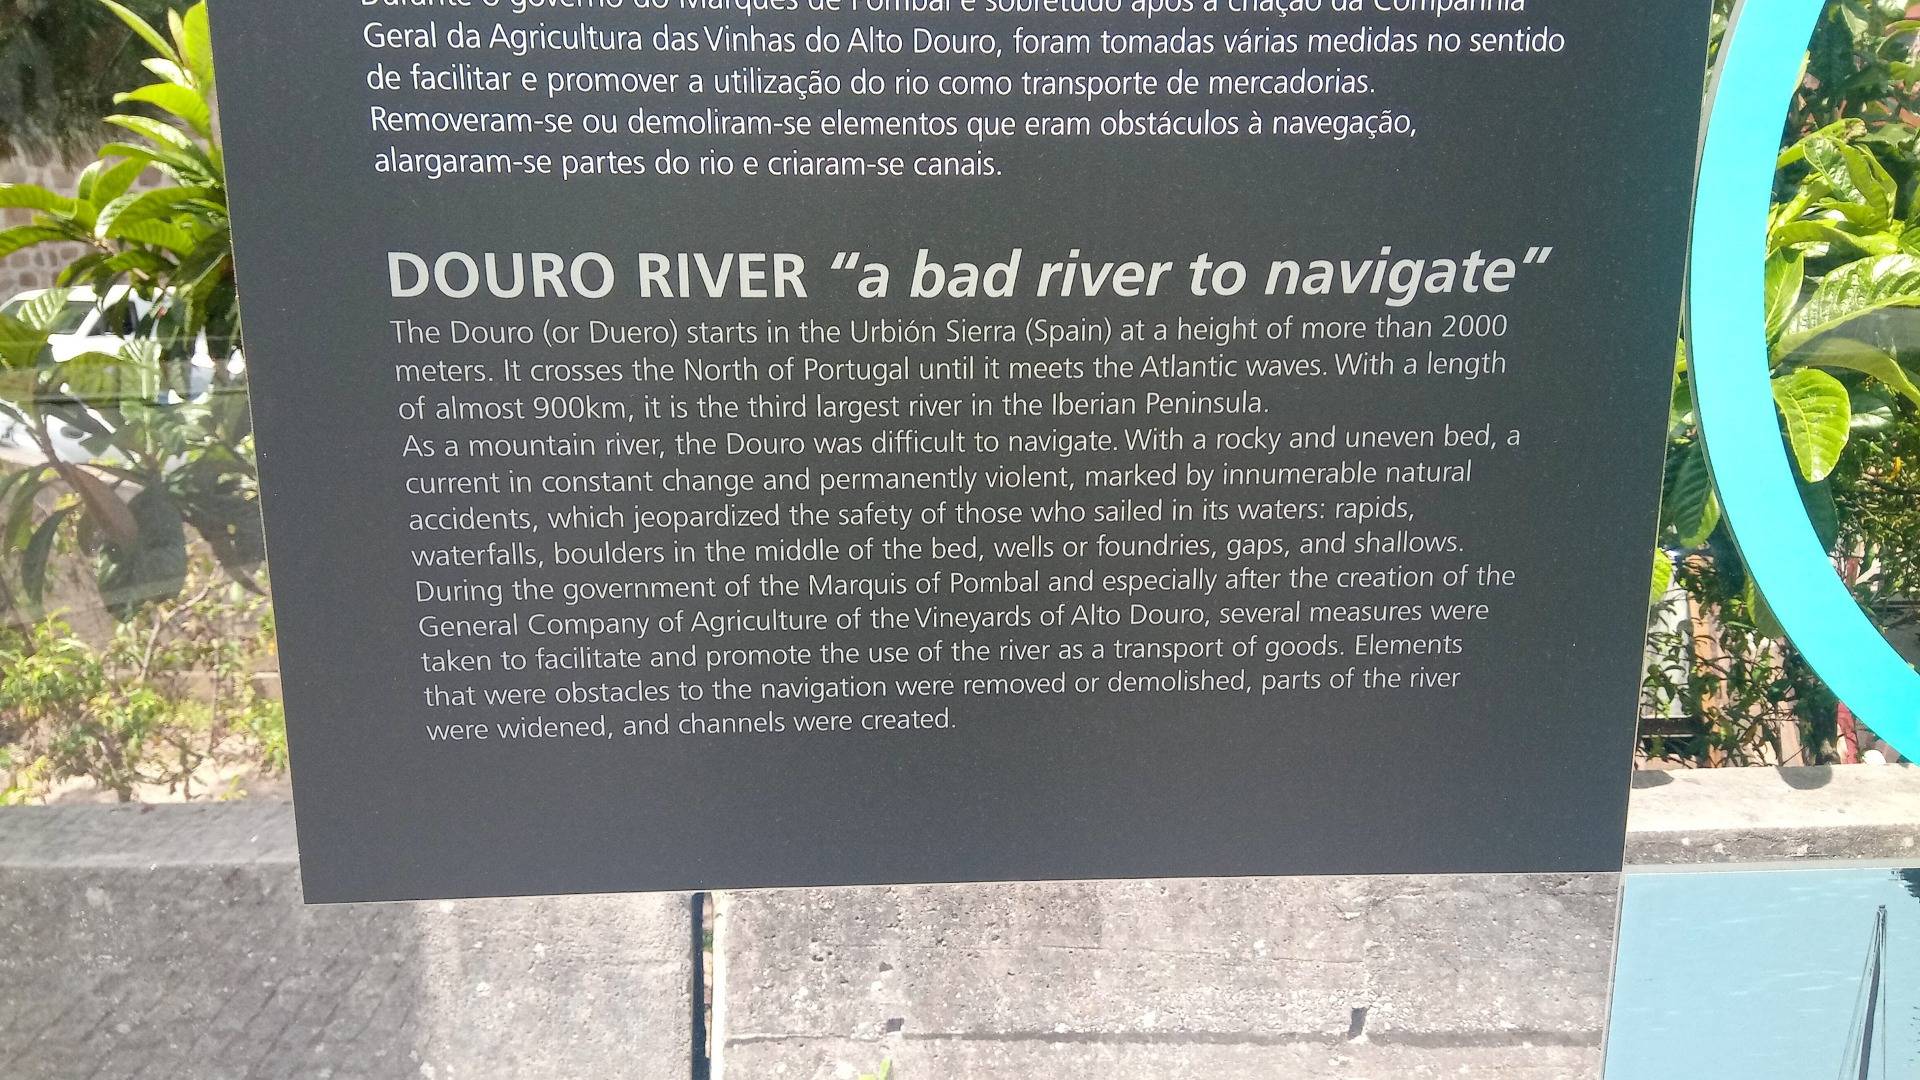 A bit of info and history on the Douro River, where Porto sits